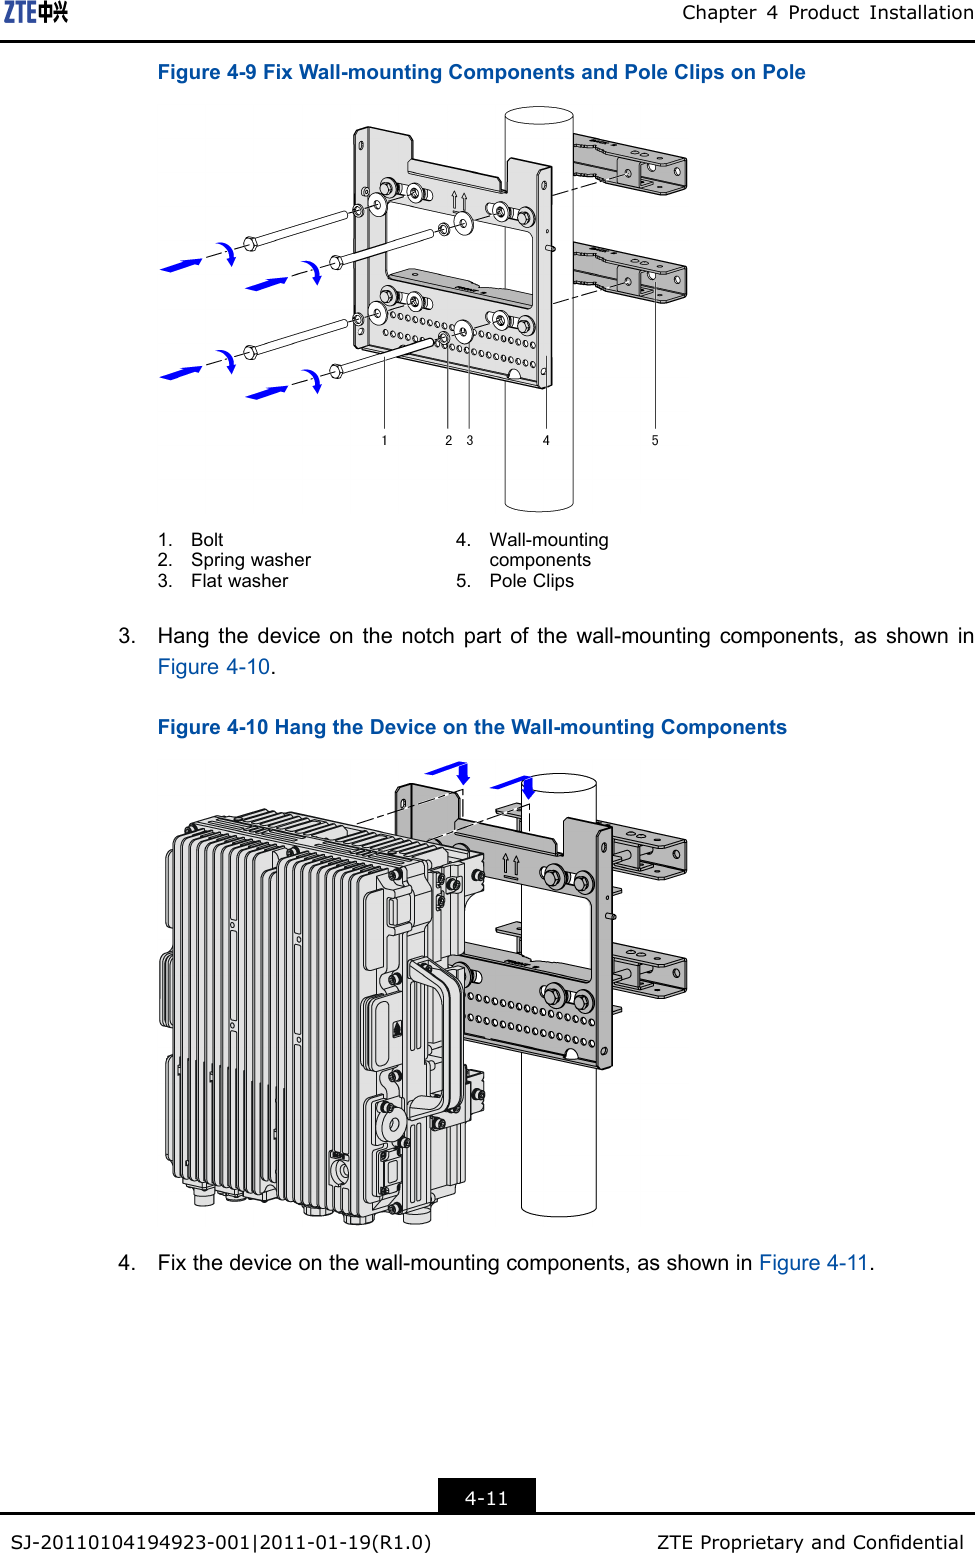 Chapter4ProductInstallationFigure4-9FixWall-mountingComponentsandPoleClipsonPole1.Bolt2.Springwasher3.Flatwasher4.Wall-mountingcomponents5.PoleClips3.Hangthedeviceonthenotchpartofthewall-mountingcomponents,asshowninFigure4-10.Figure4-10HangtheDeviceontheWall-mountingComponents4.Fixthedeviceonthewall-mountingcomponents,asshowninFigure4-11.4-11SJ-20110104194923-001|2011-01-19(R1.0)ZTEProprietaryandCondential